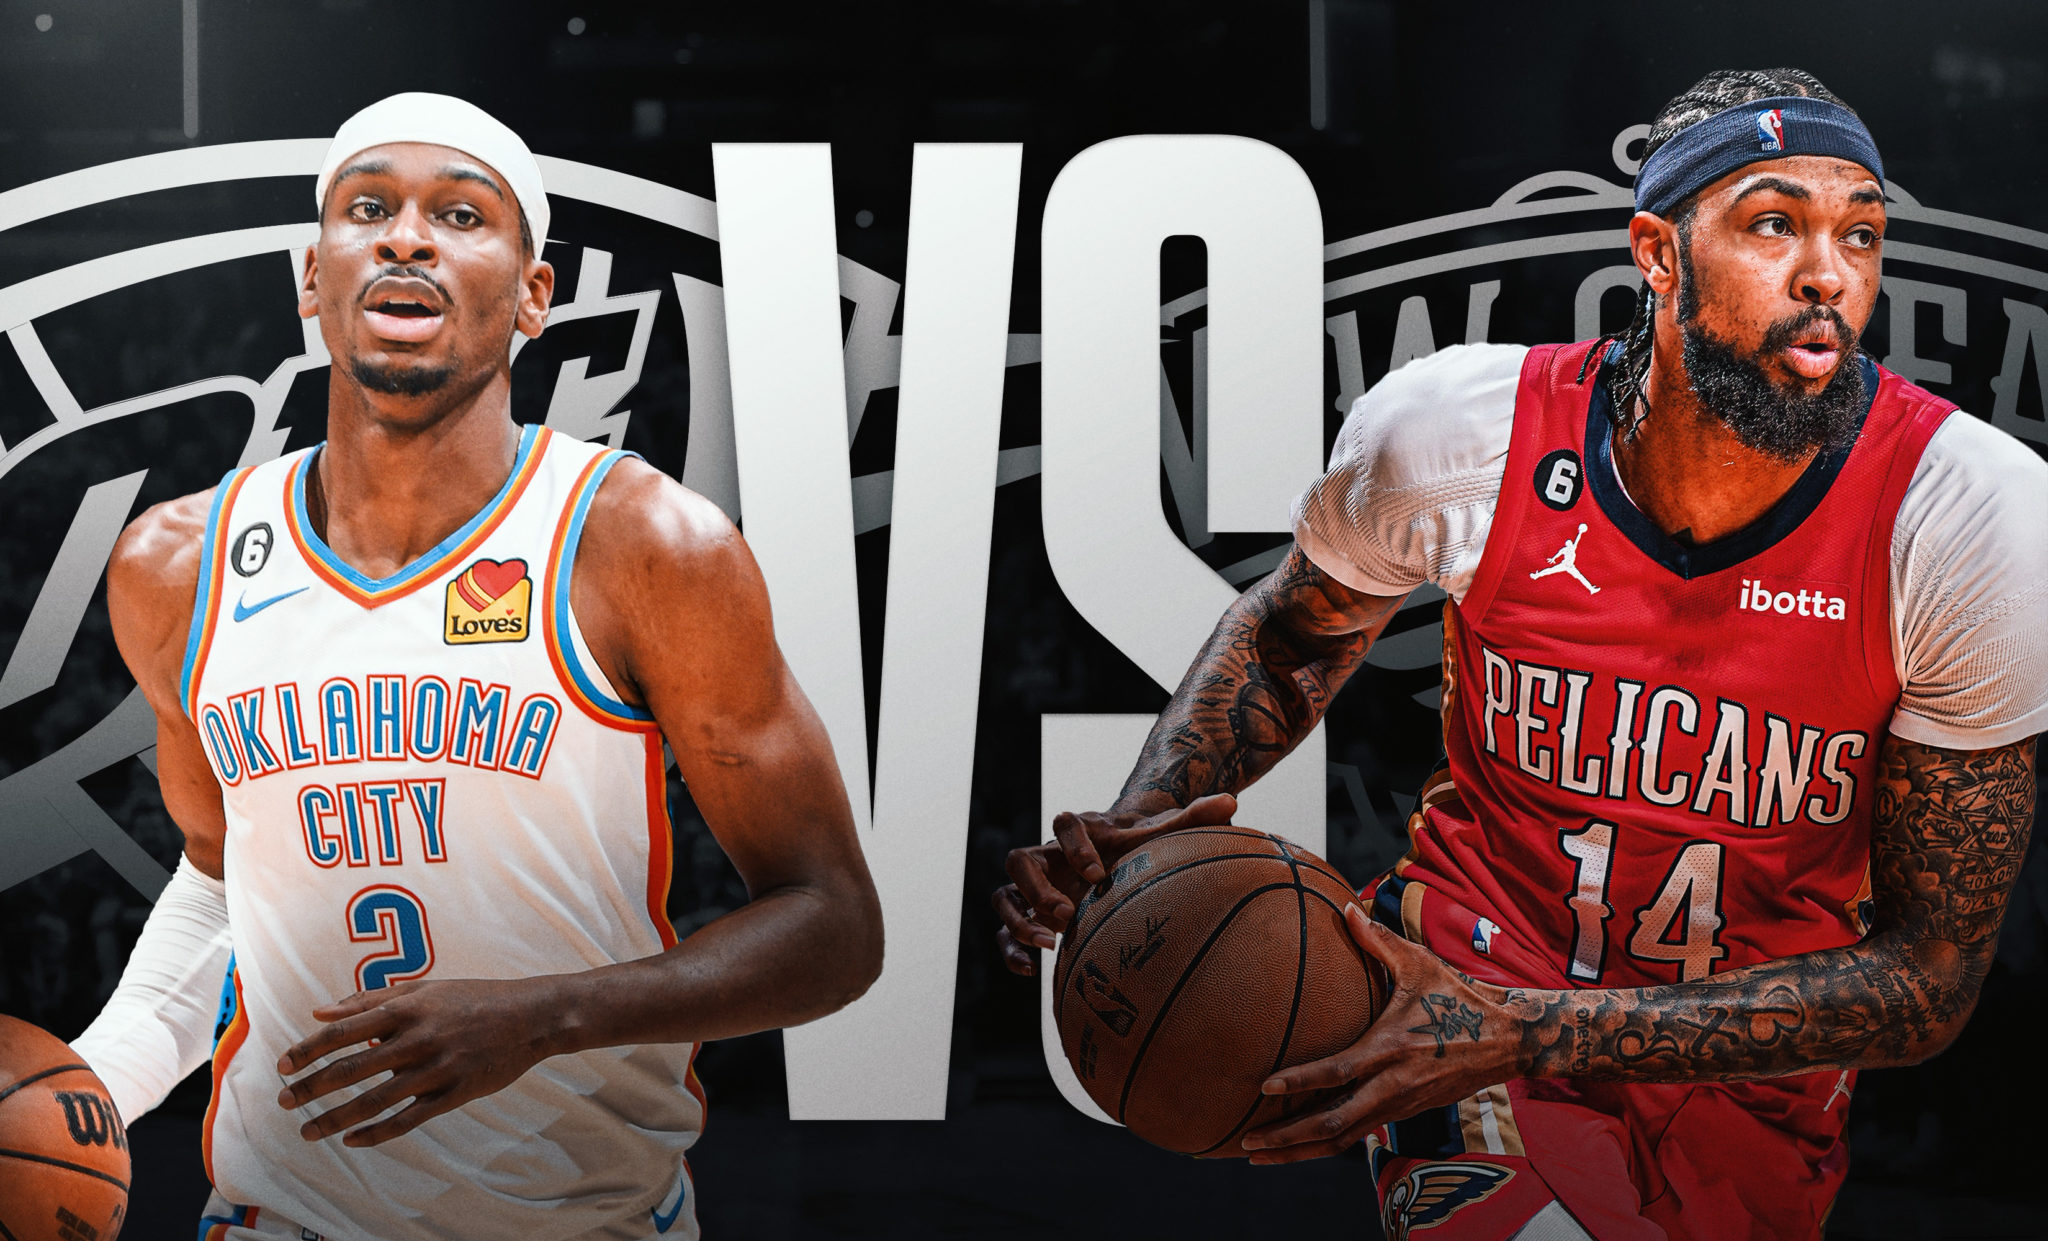 Is Zion Playing In The Playoffs? Pelicans vs. Thunder Play-In Preview, Odds & Predictions